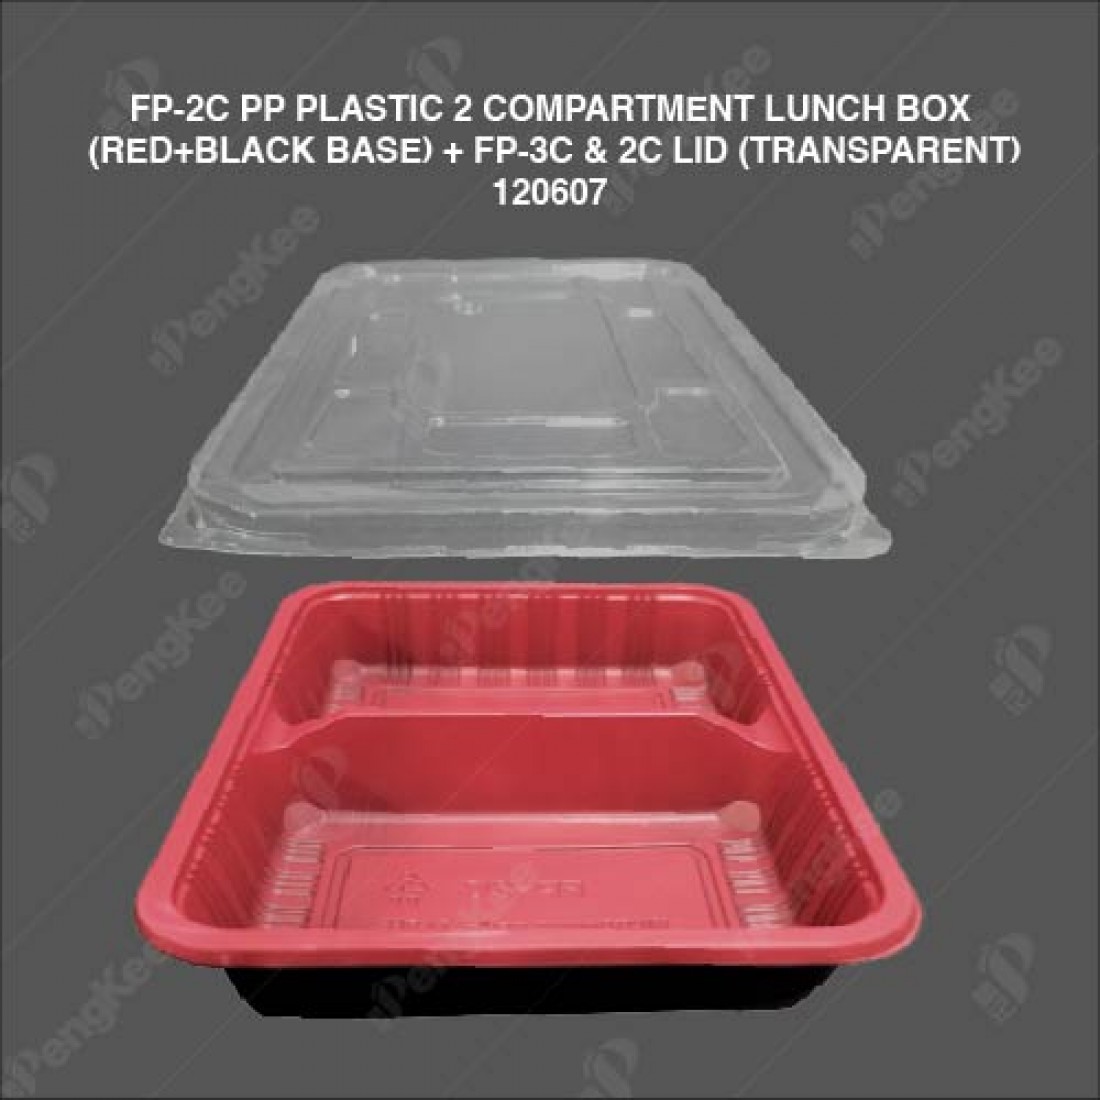 FP-2C PP PLASTIC 2 COMPARTMENT LUNCH BOX (RED+BLACK BASE) TRANSPARENT COVER